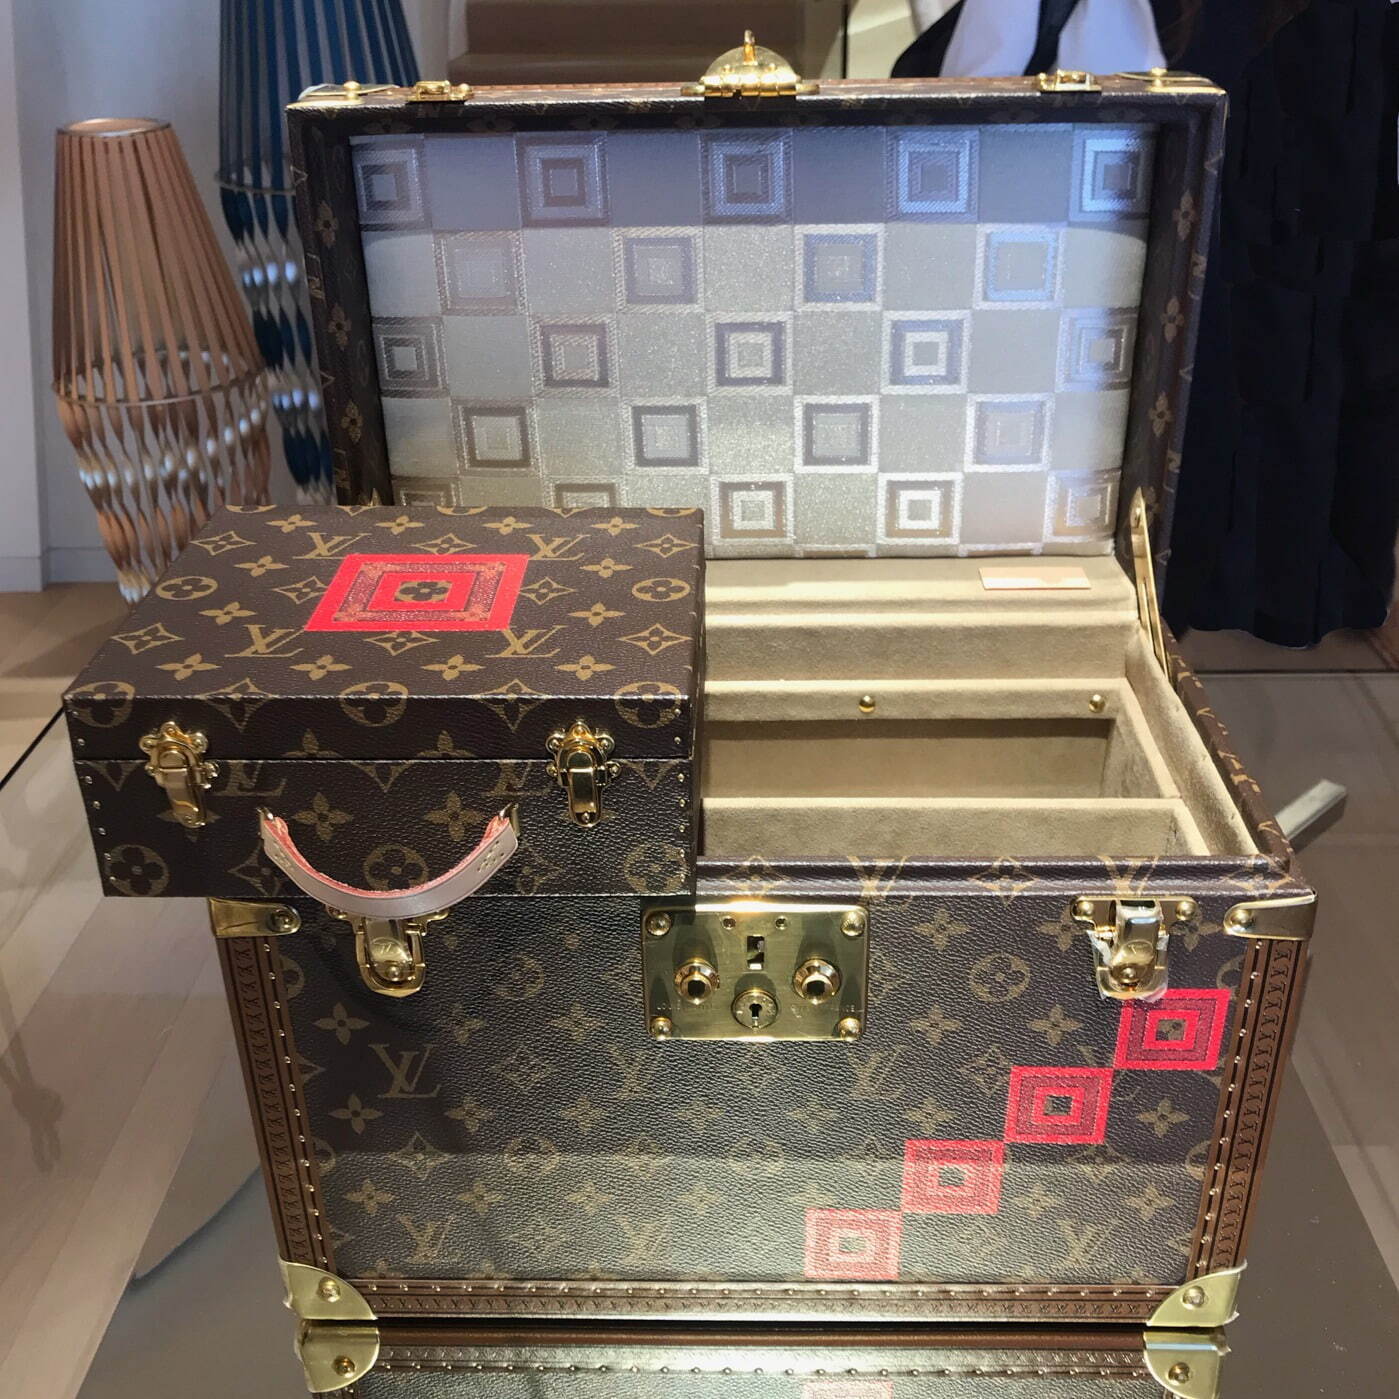 Louis Vuitton Ginza Namiki-dori store is renovated in Ginza district, Chuo  Ward, Tokyo on March 16, 2021. The store, which opened as the first  directly managed store in Japan in 1981, will